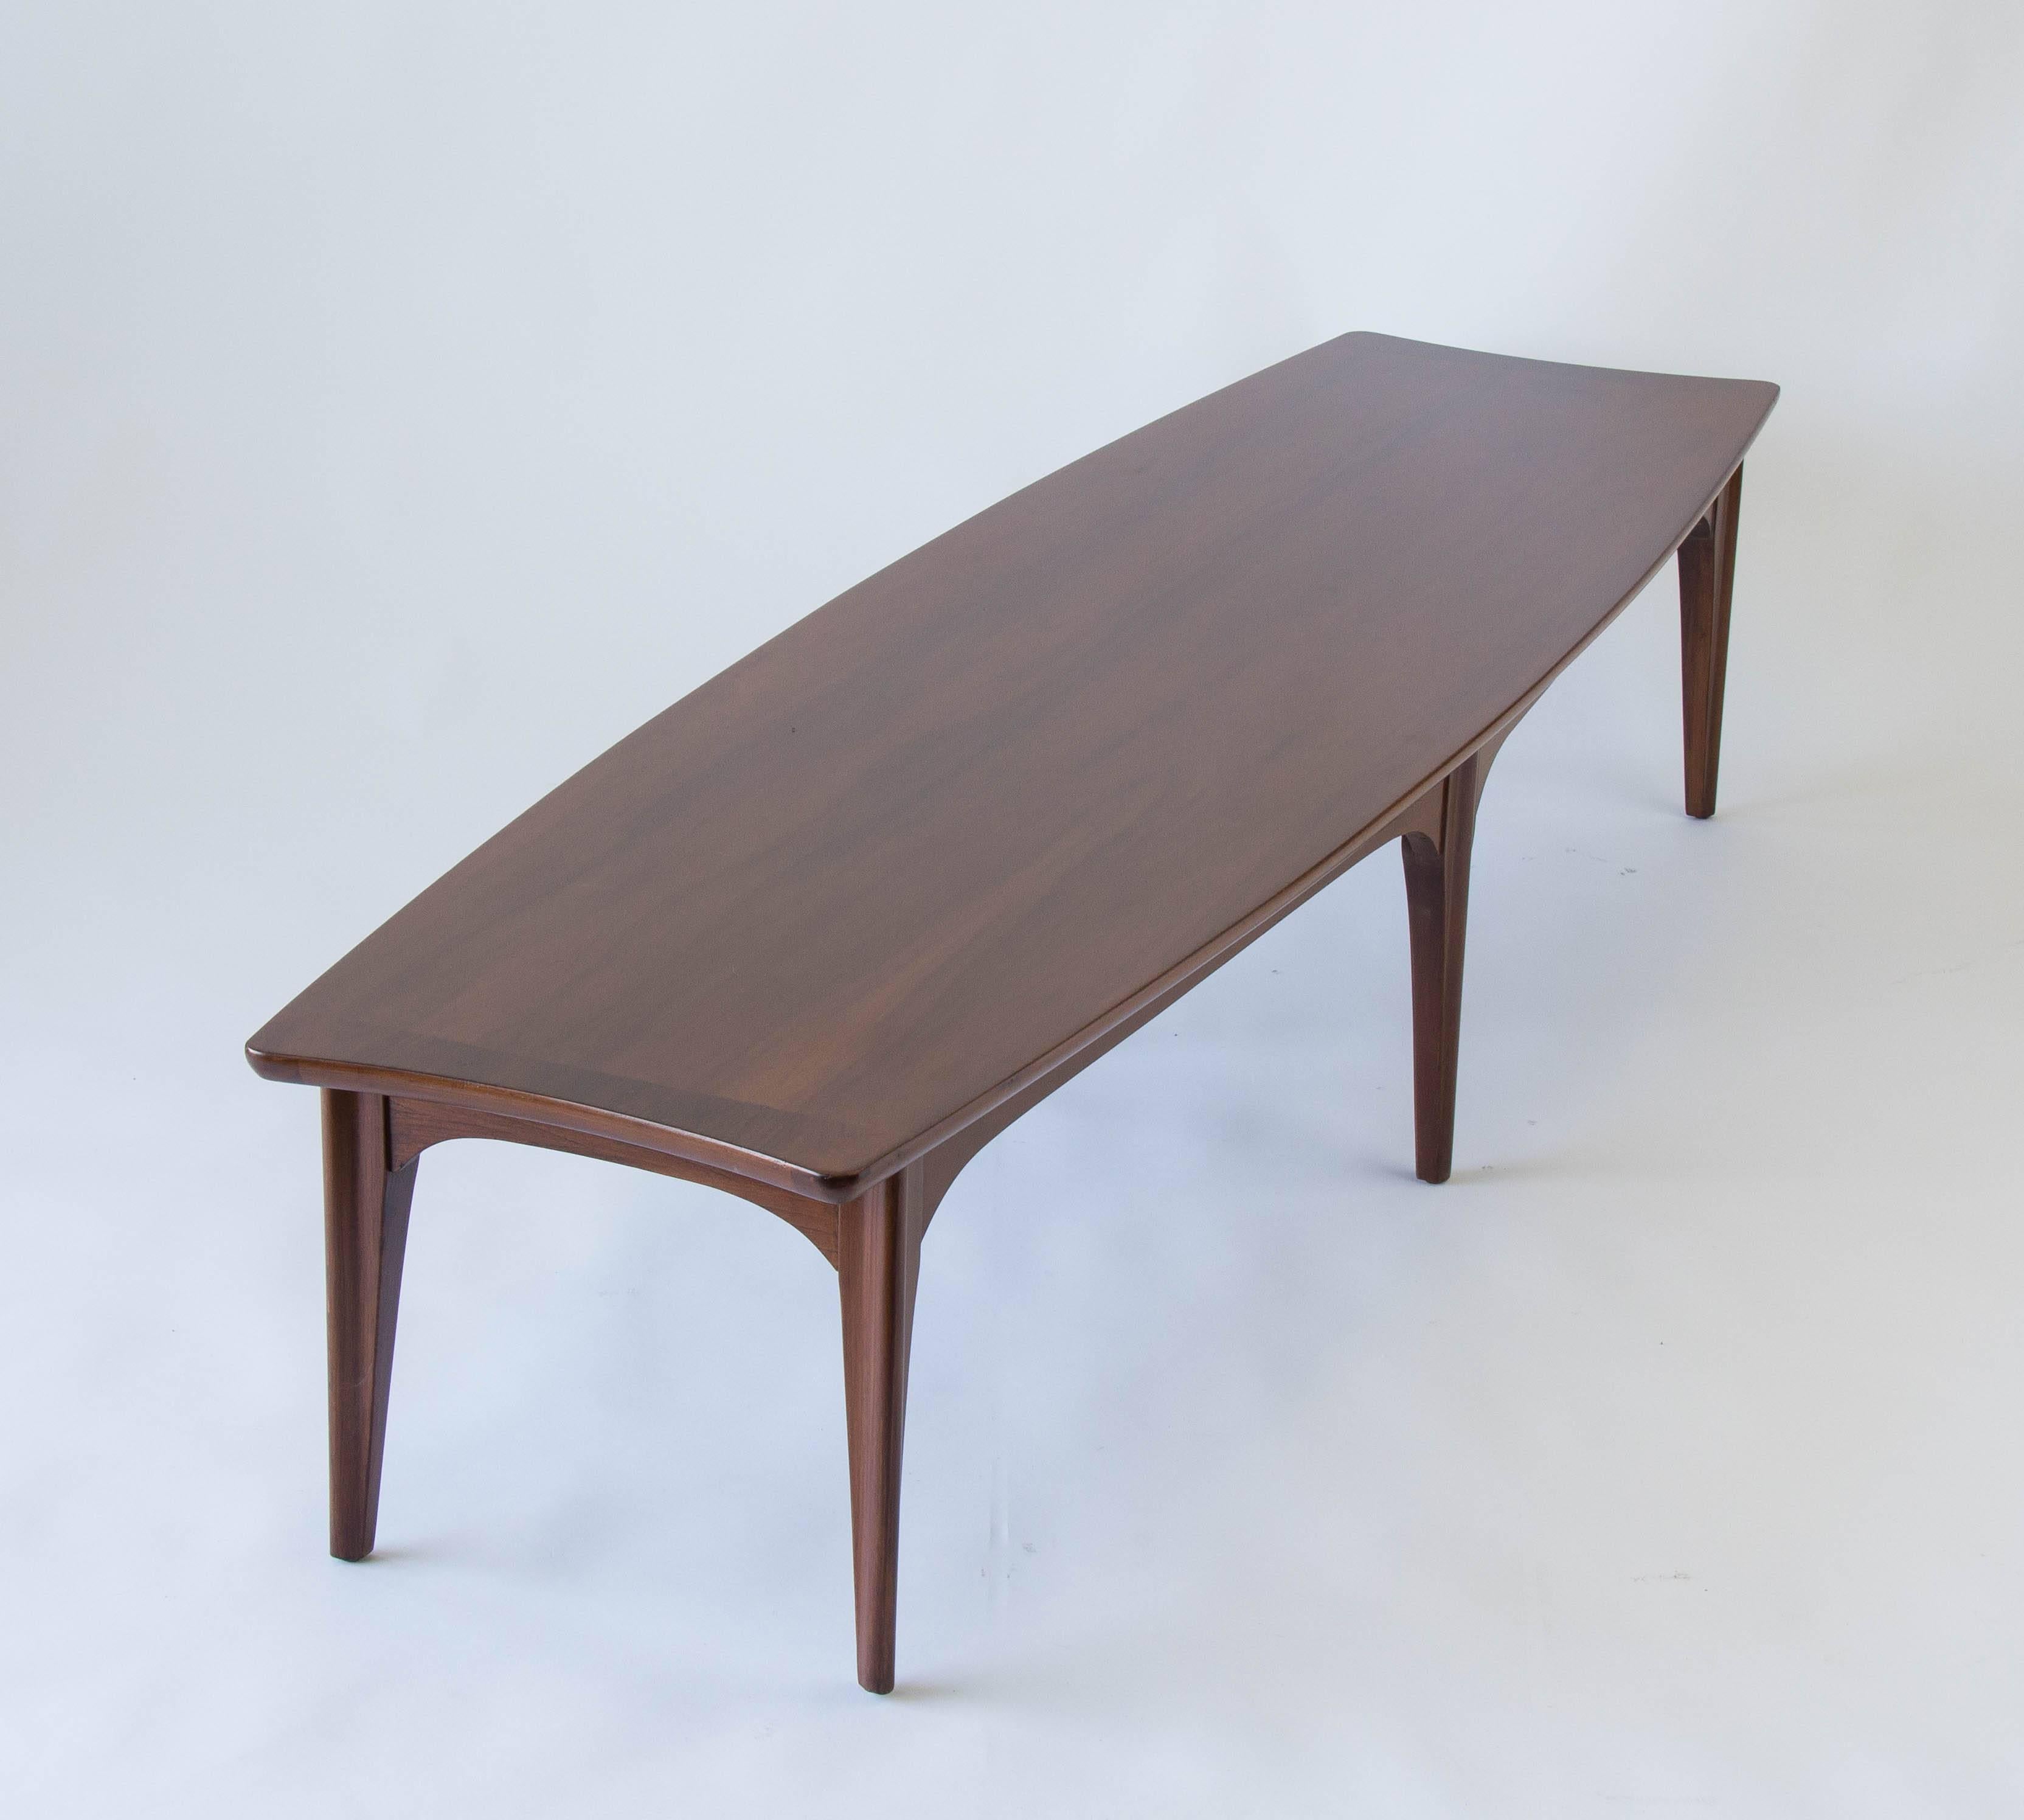 20th Century American Made Surfboard Coffee Table in Walnut and Rosewood